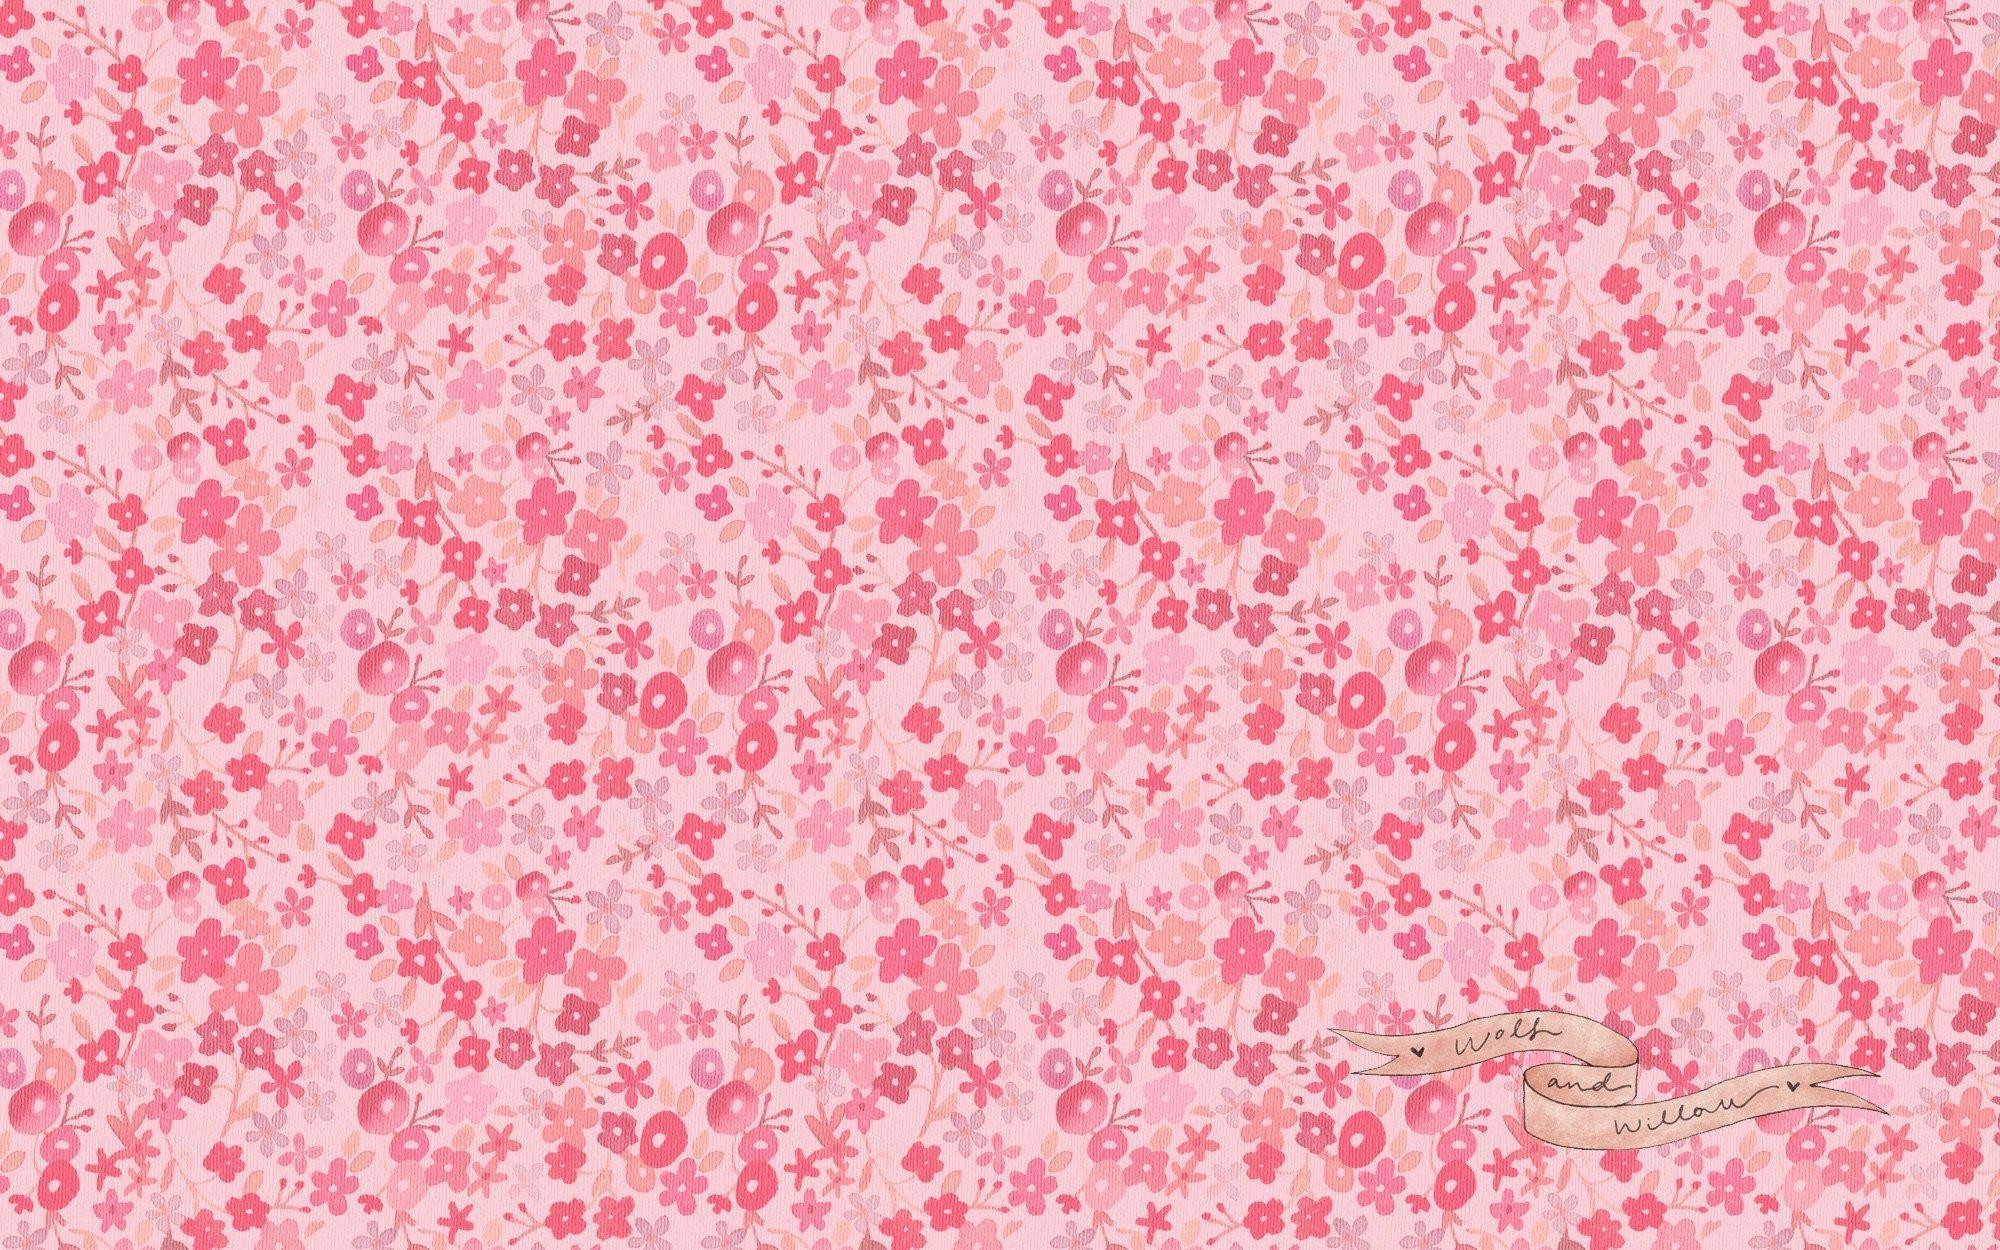 2000x1250 Girly Wallpapers In HQ Pict For Background 5I0 | Super Wallpaper